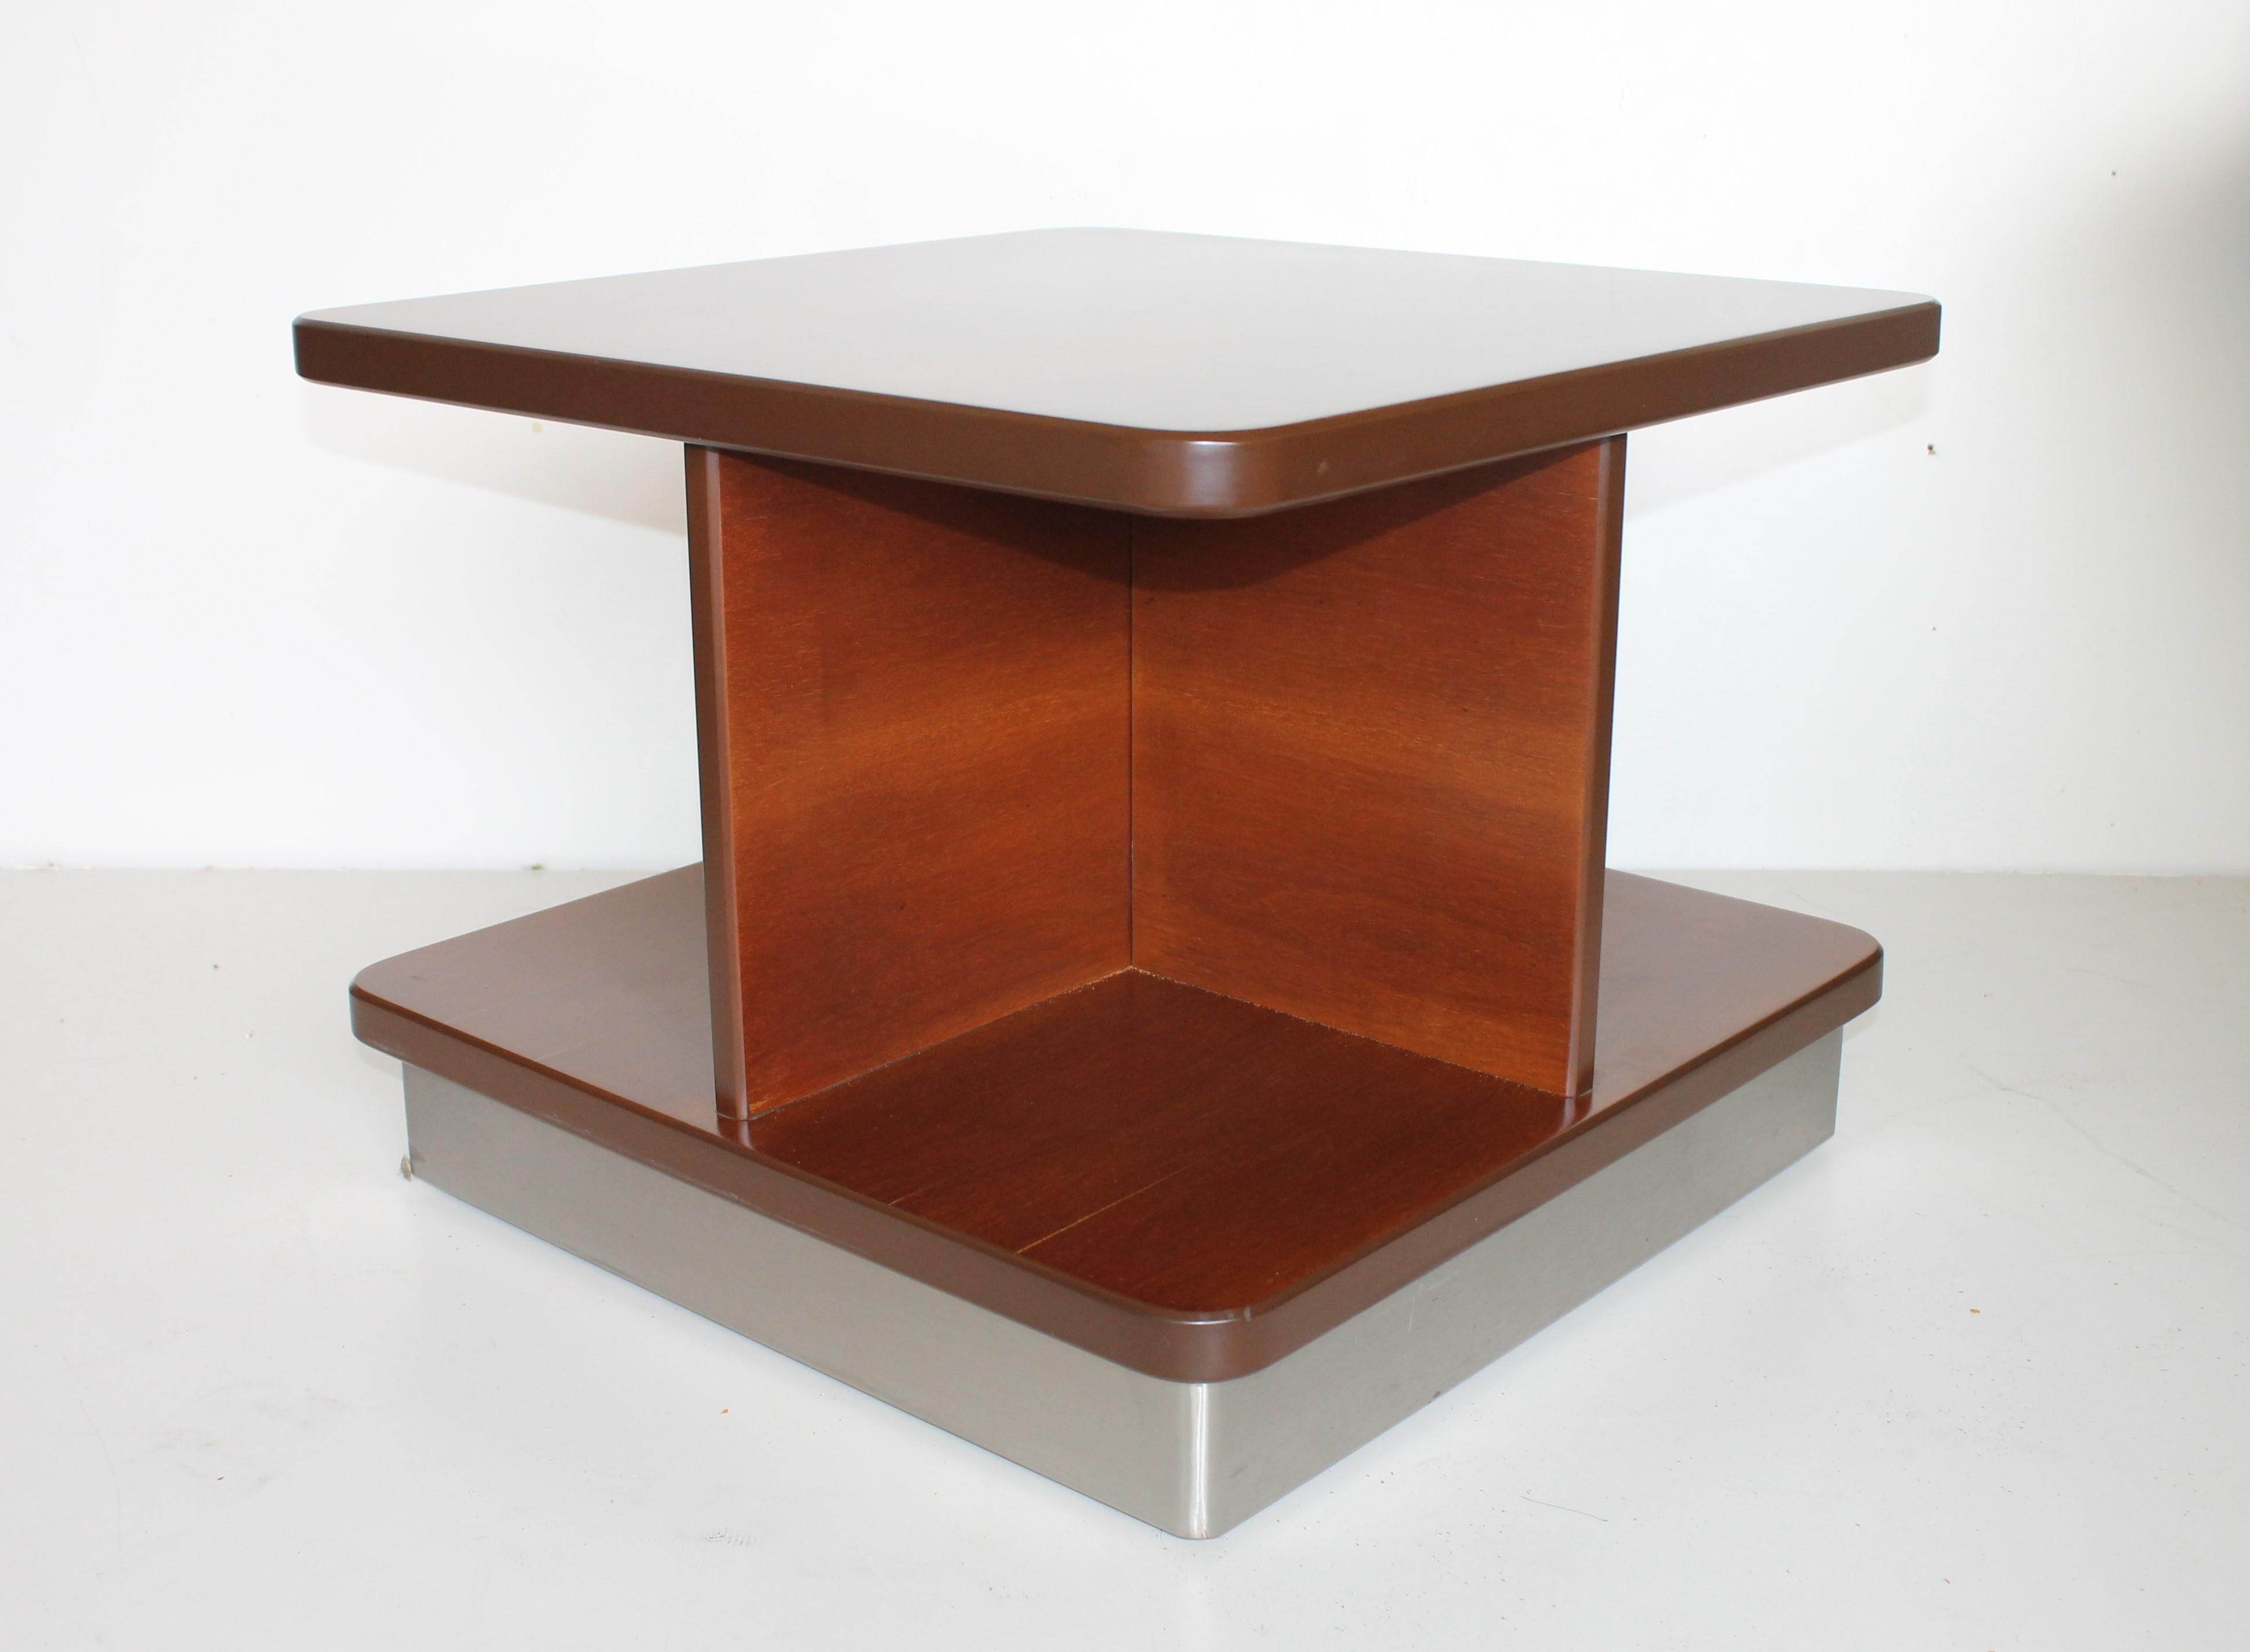 Laminated Mid-Century Rosewood Italian Coffee or Sofas Table with Wheels by Formanova 70s. For Sale